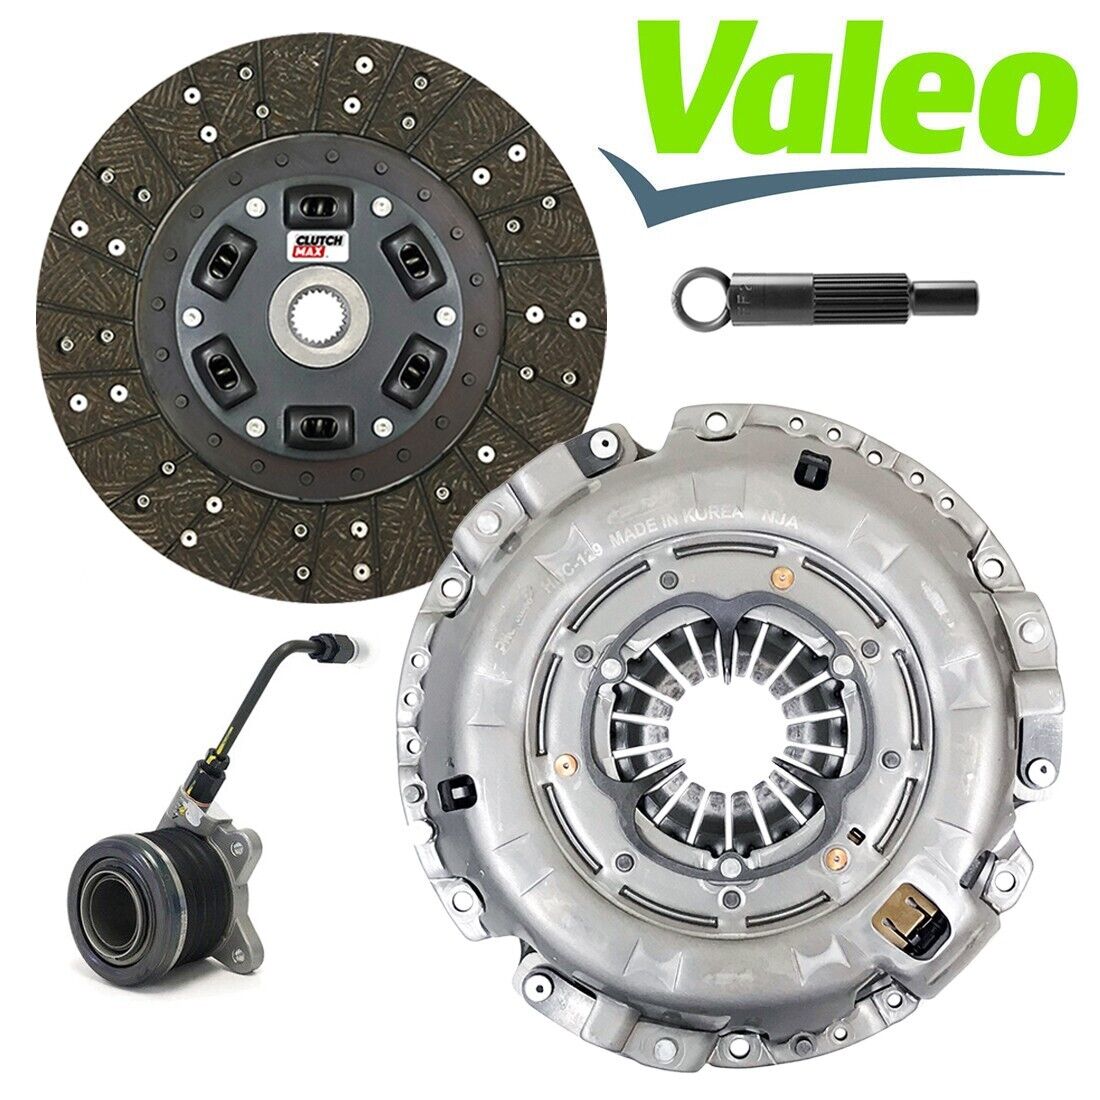 VALEO STAGE 2 HD SPORT CLUTCH KIT+SLAVE CYL for 13-16 HYUNDAI GENESIS COUPE 3.8L